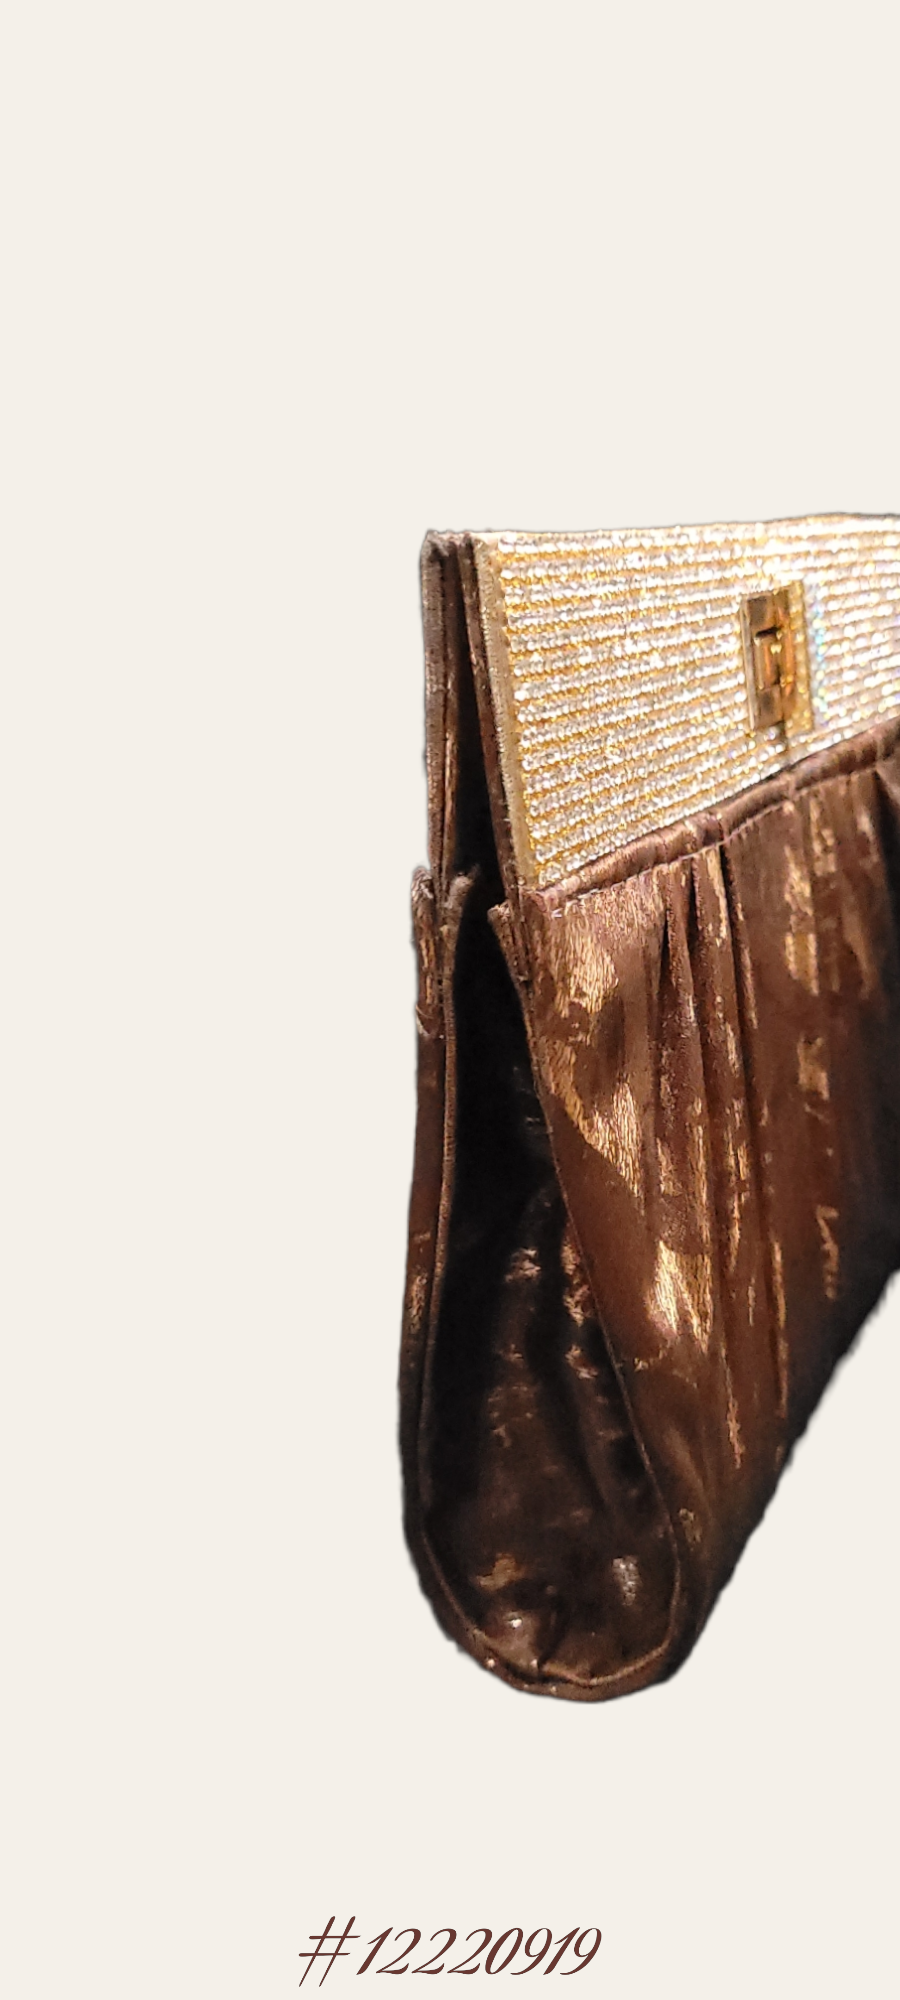 EYE CATCHING CLUTCH, PARTY THEME IN BROWN COLOR WITH GOLD DIAMONDS